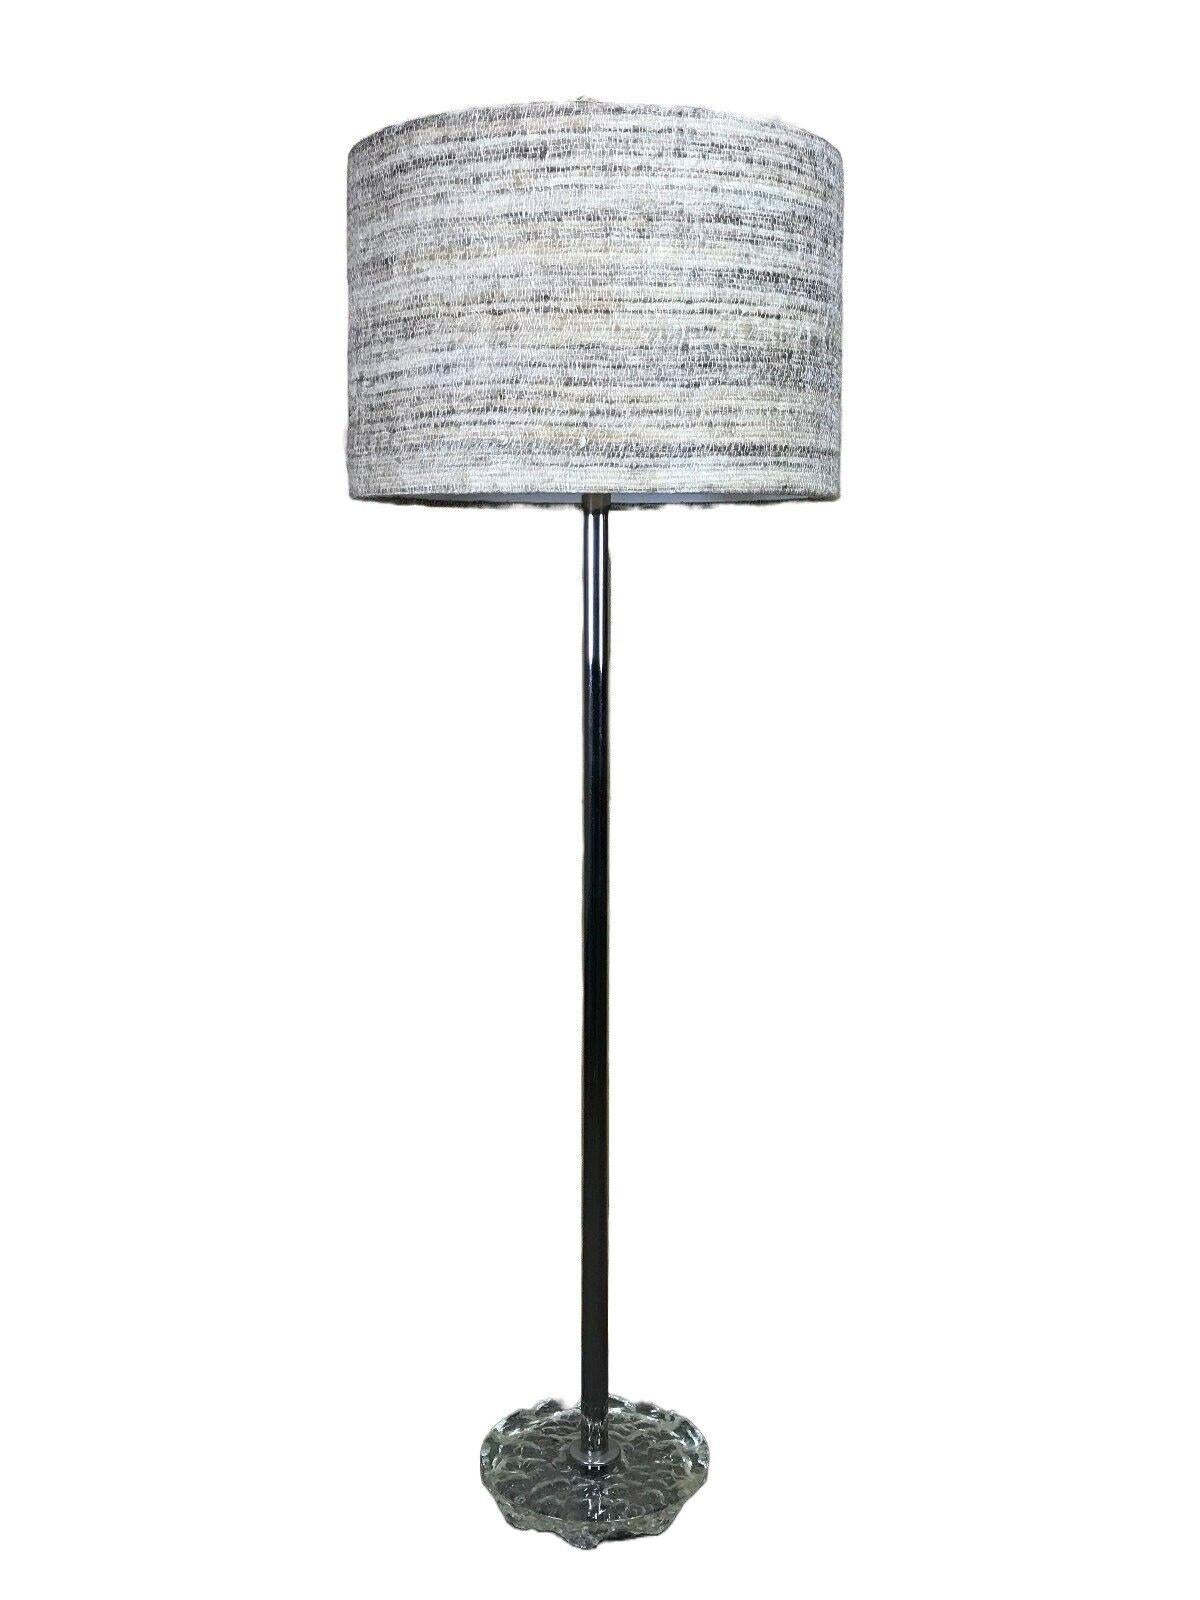 60s 70s Lamp light floor lamp Temde Space Age Design

Object: floor lamp

Manufacturer: Temde

Condition: good

Age: around 1960-1970

Dimensions:

Diameter = 52.5cm
Height = 152cm

Other notes:

The pictures serve as part of the